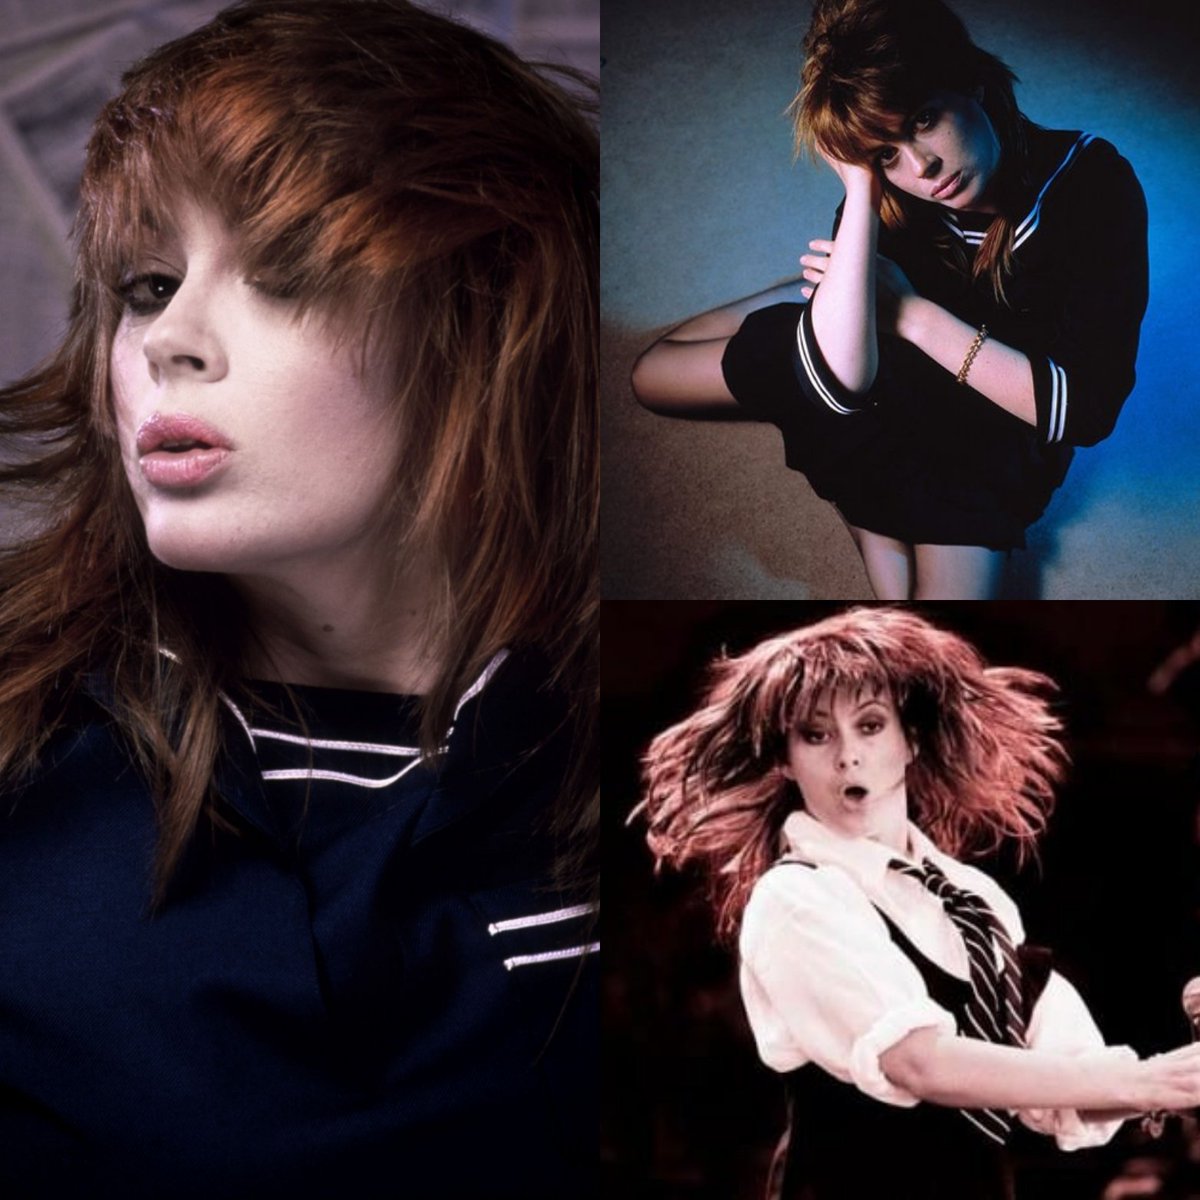 Remembering
the late, great
#ChrissyAmphlett
born on this date in 1959.
What are your 
favourite #Divinyls tracks?